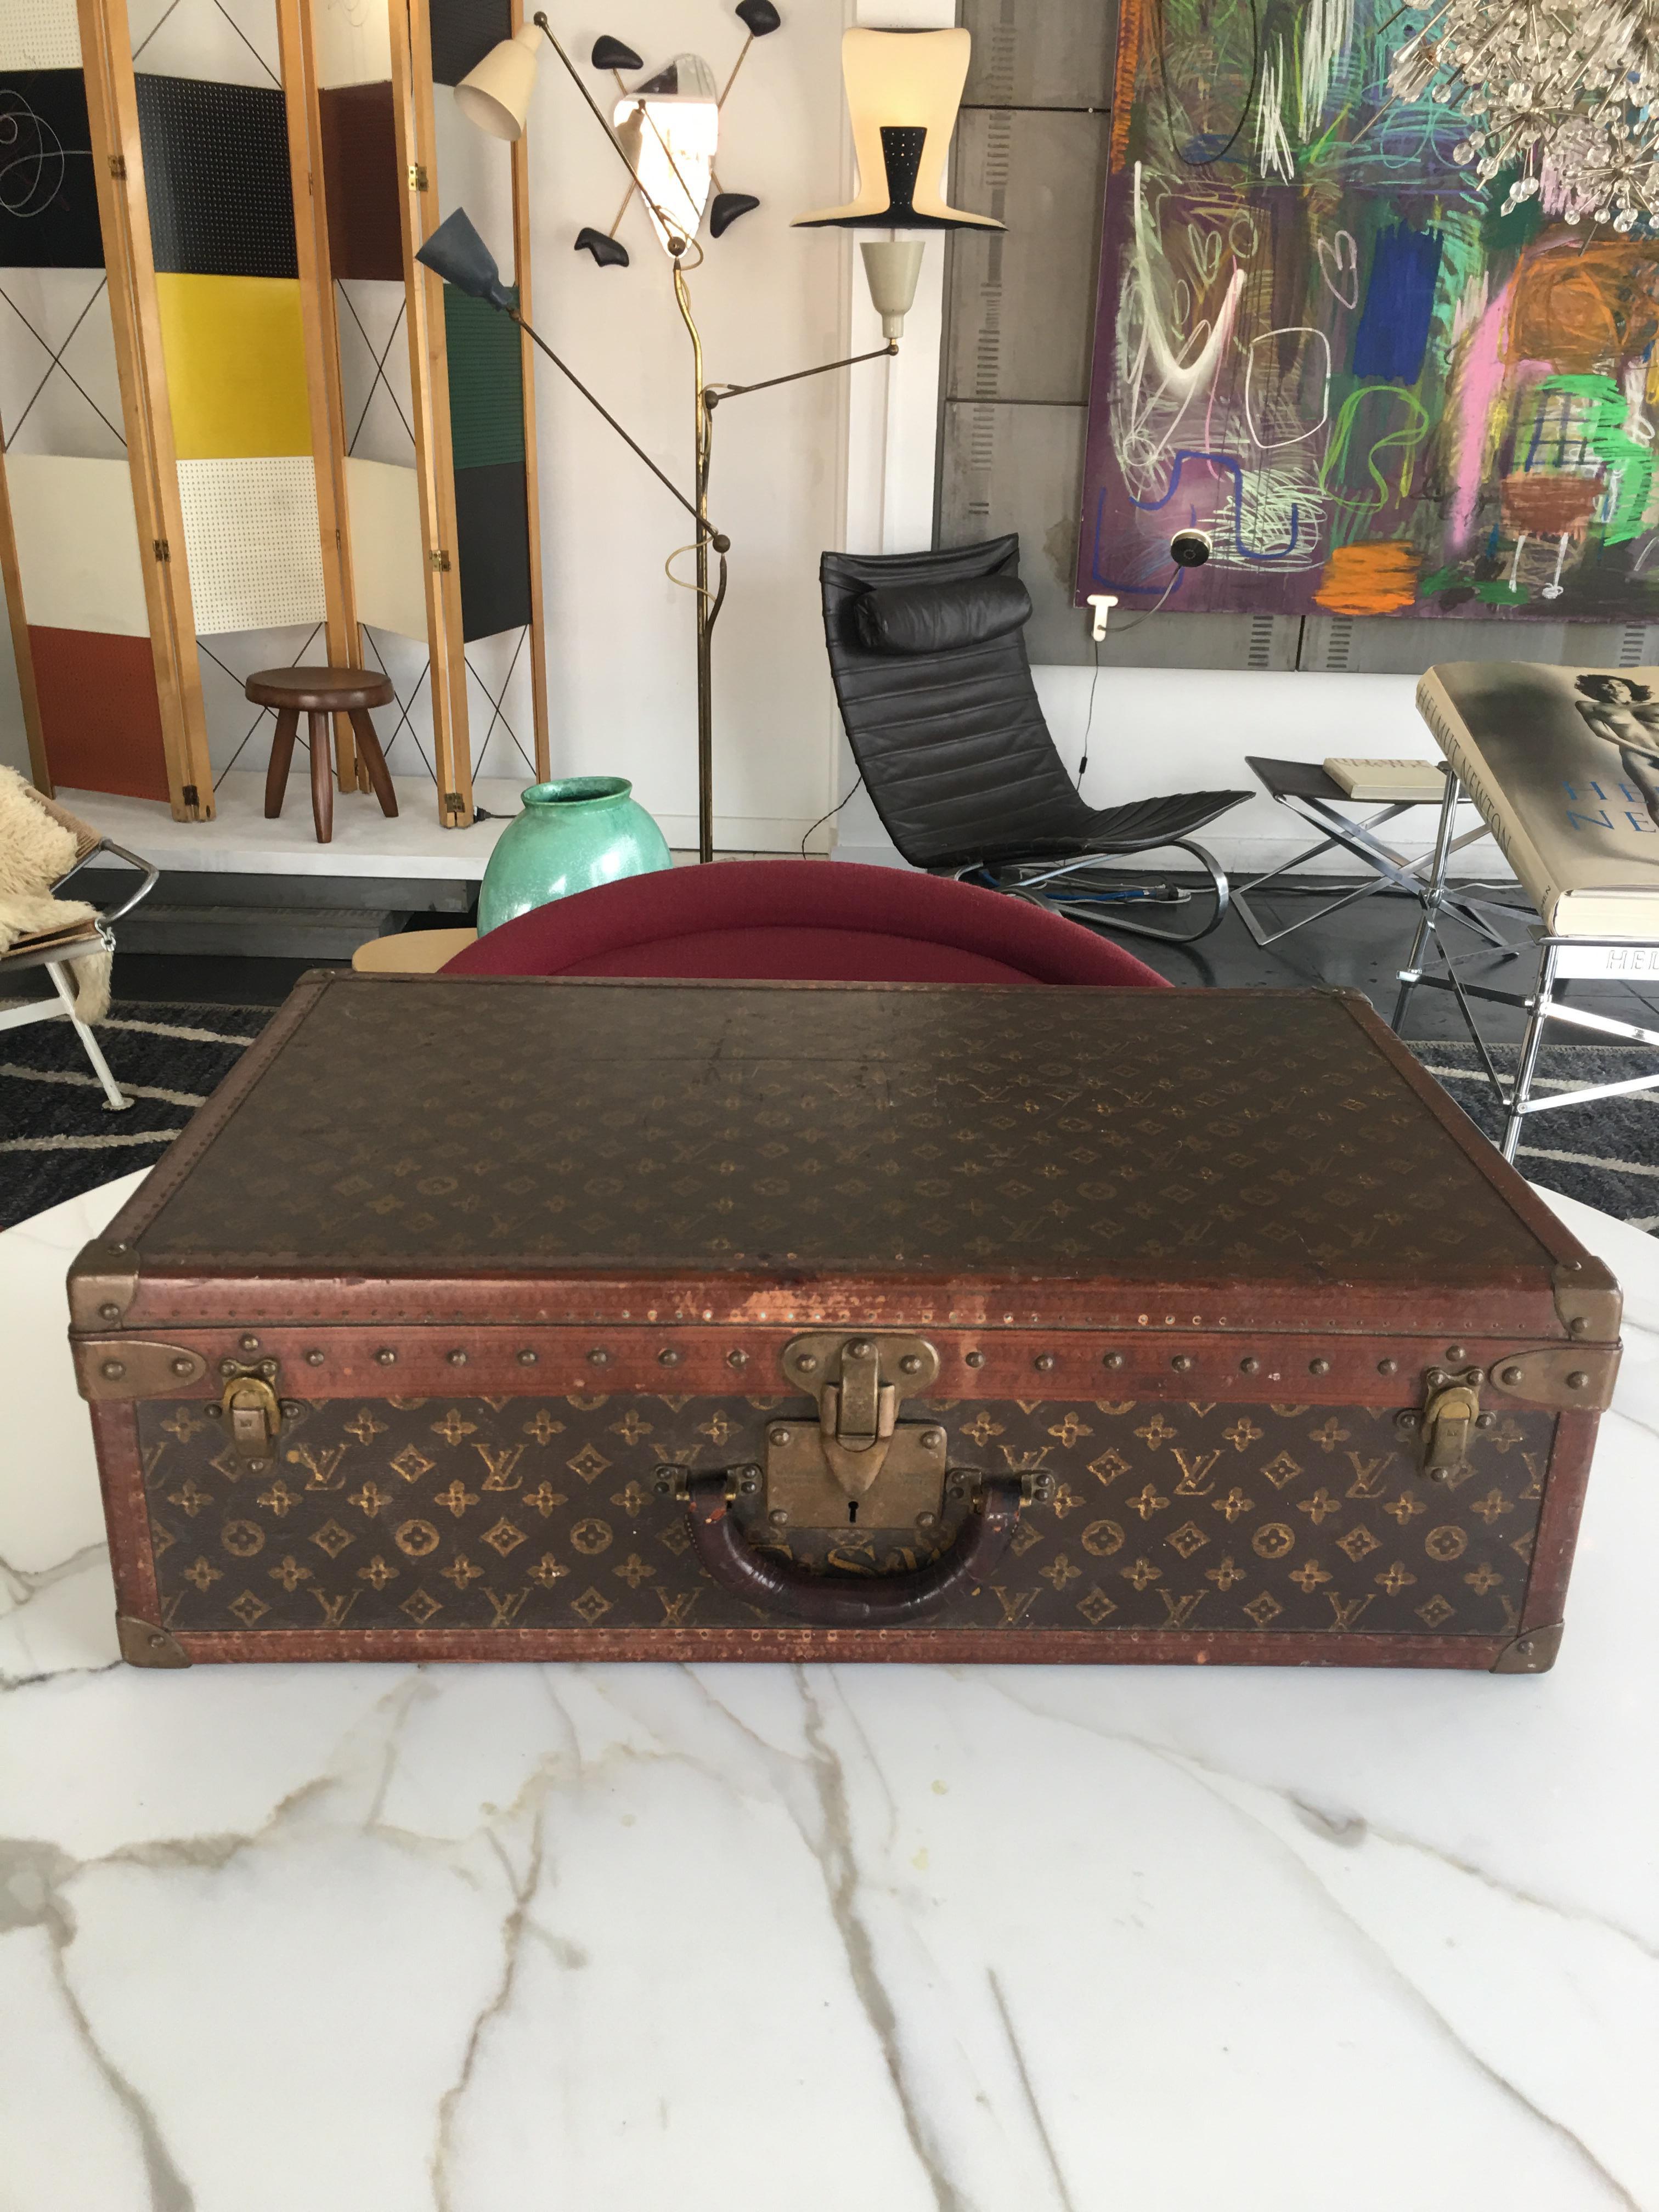 Vintage suitcase by Louis Vuitton, in great vintage condition. France 1940s.